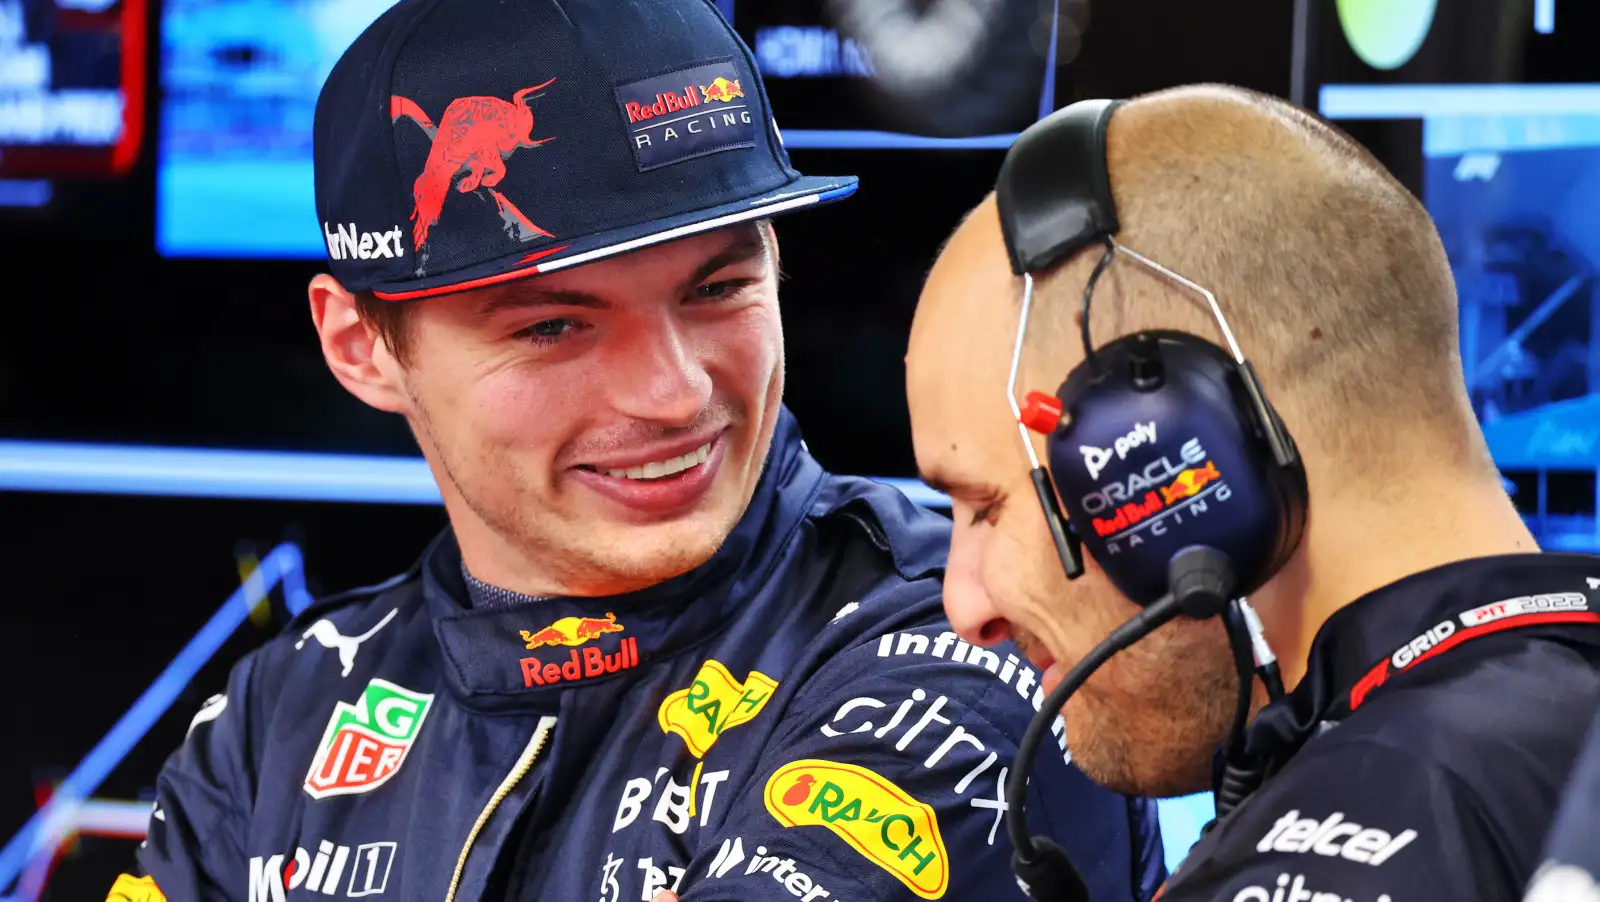 Red Bull Clarifies Lambiase's Absence from Verstappen's FP1 Engineering Duty